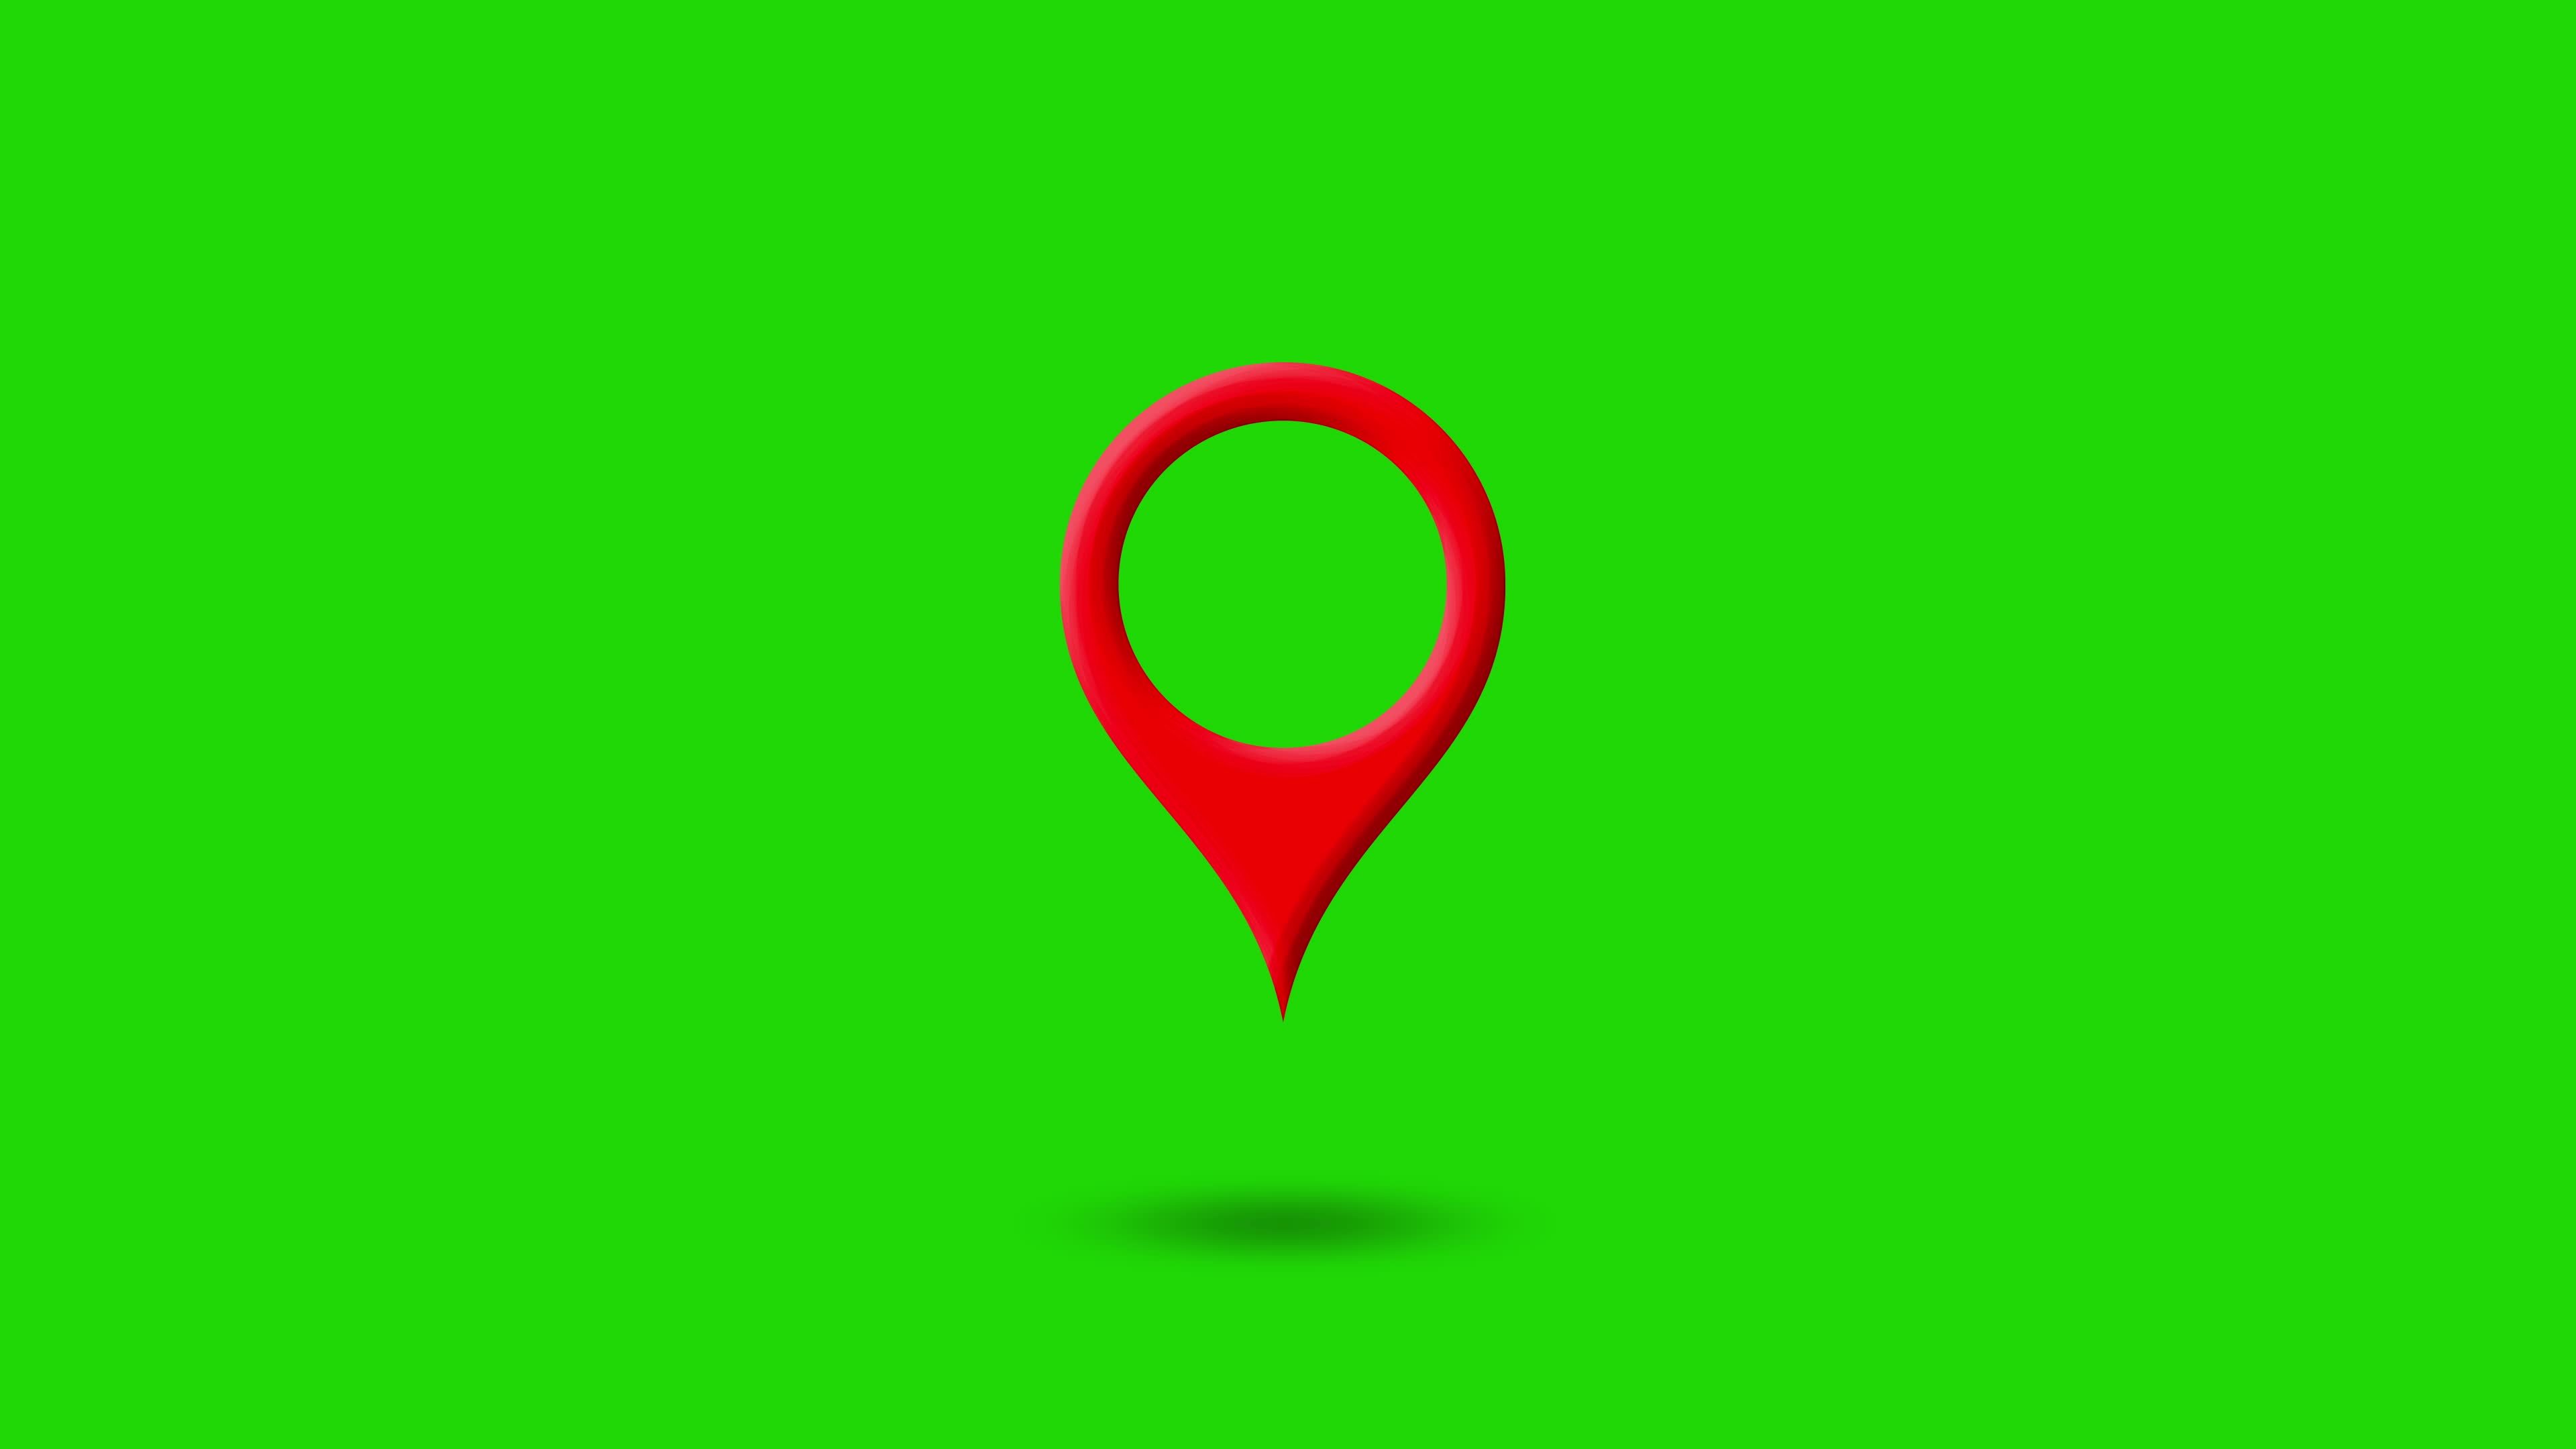 Gps Animation Stock Video Footage for Free Download